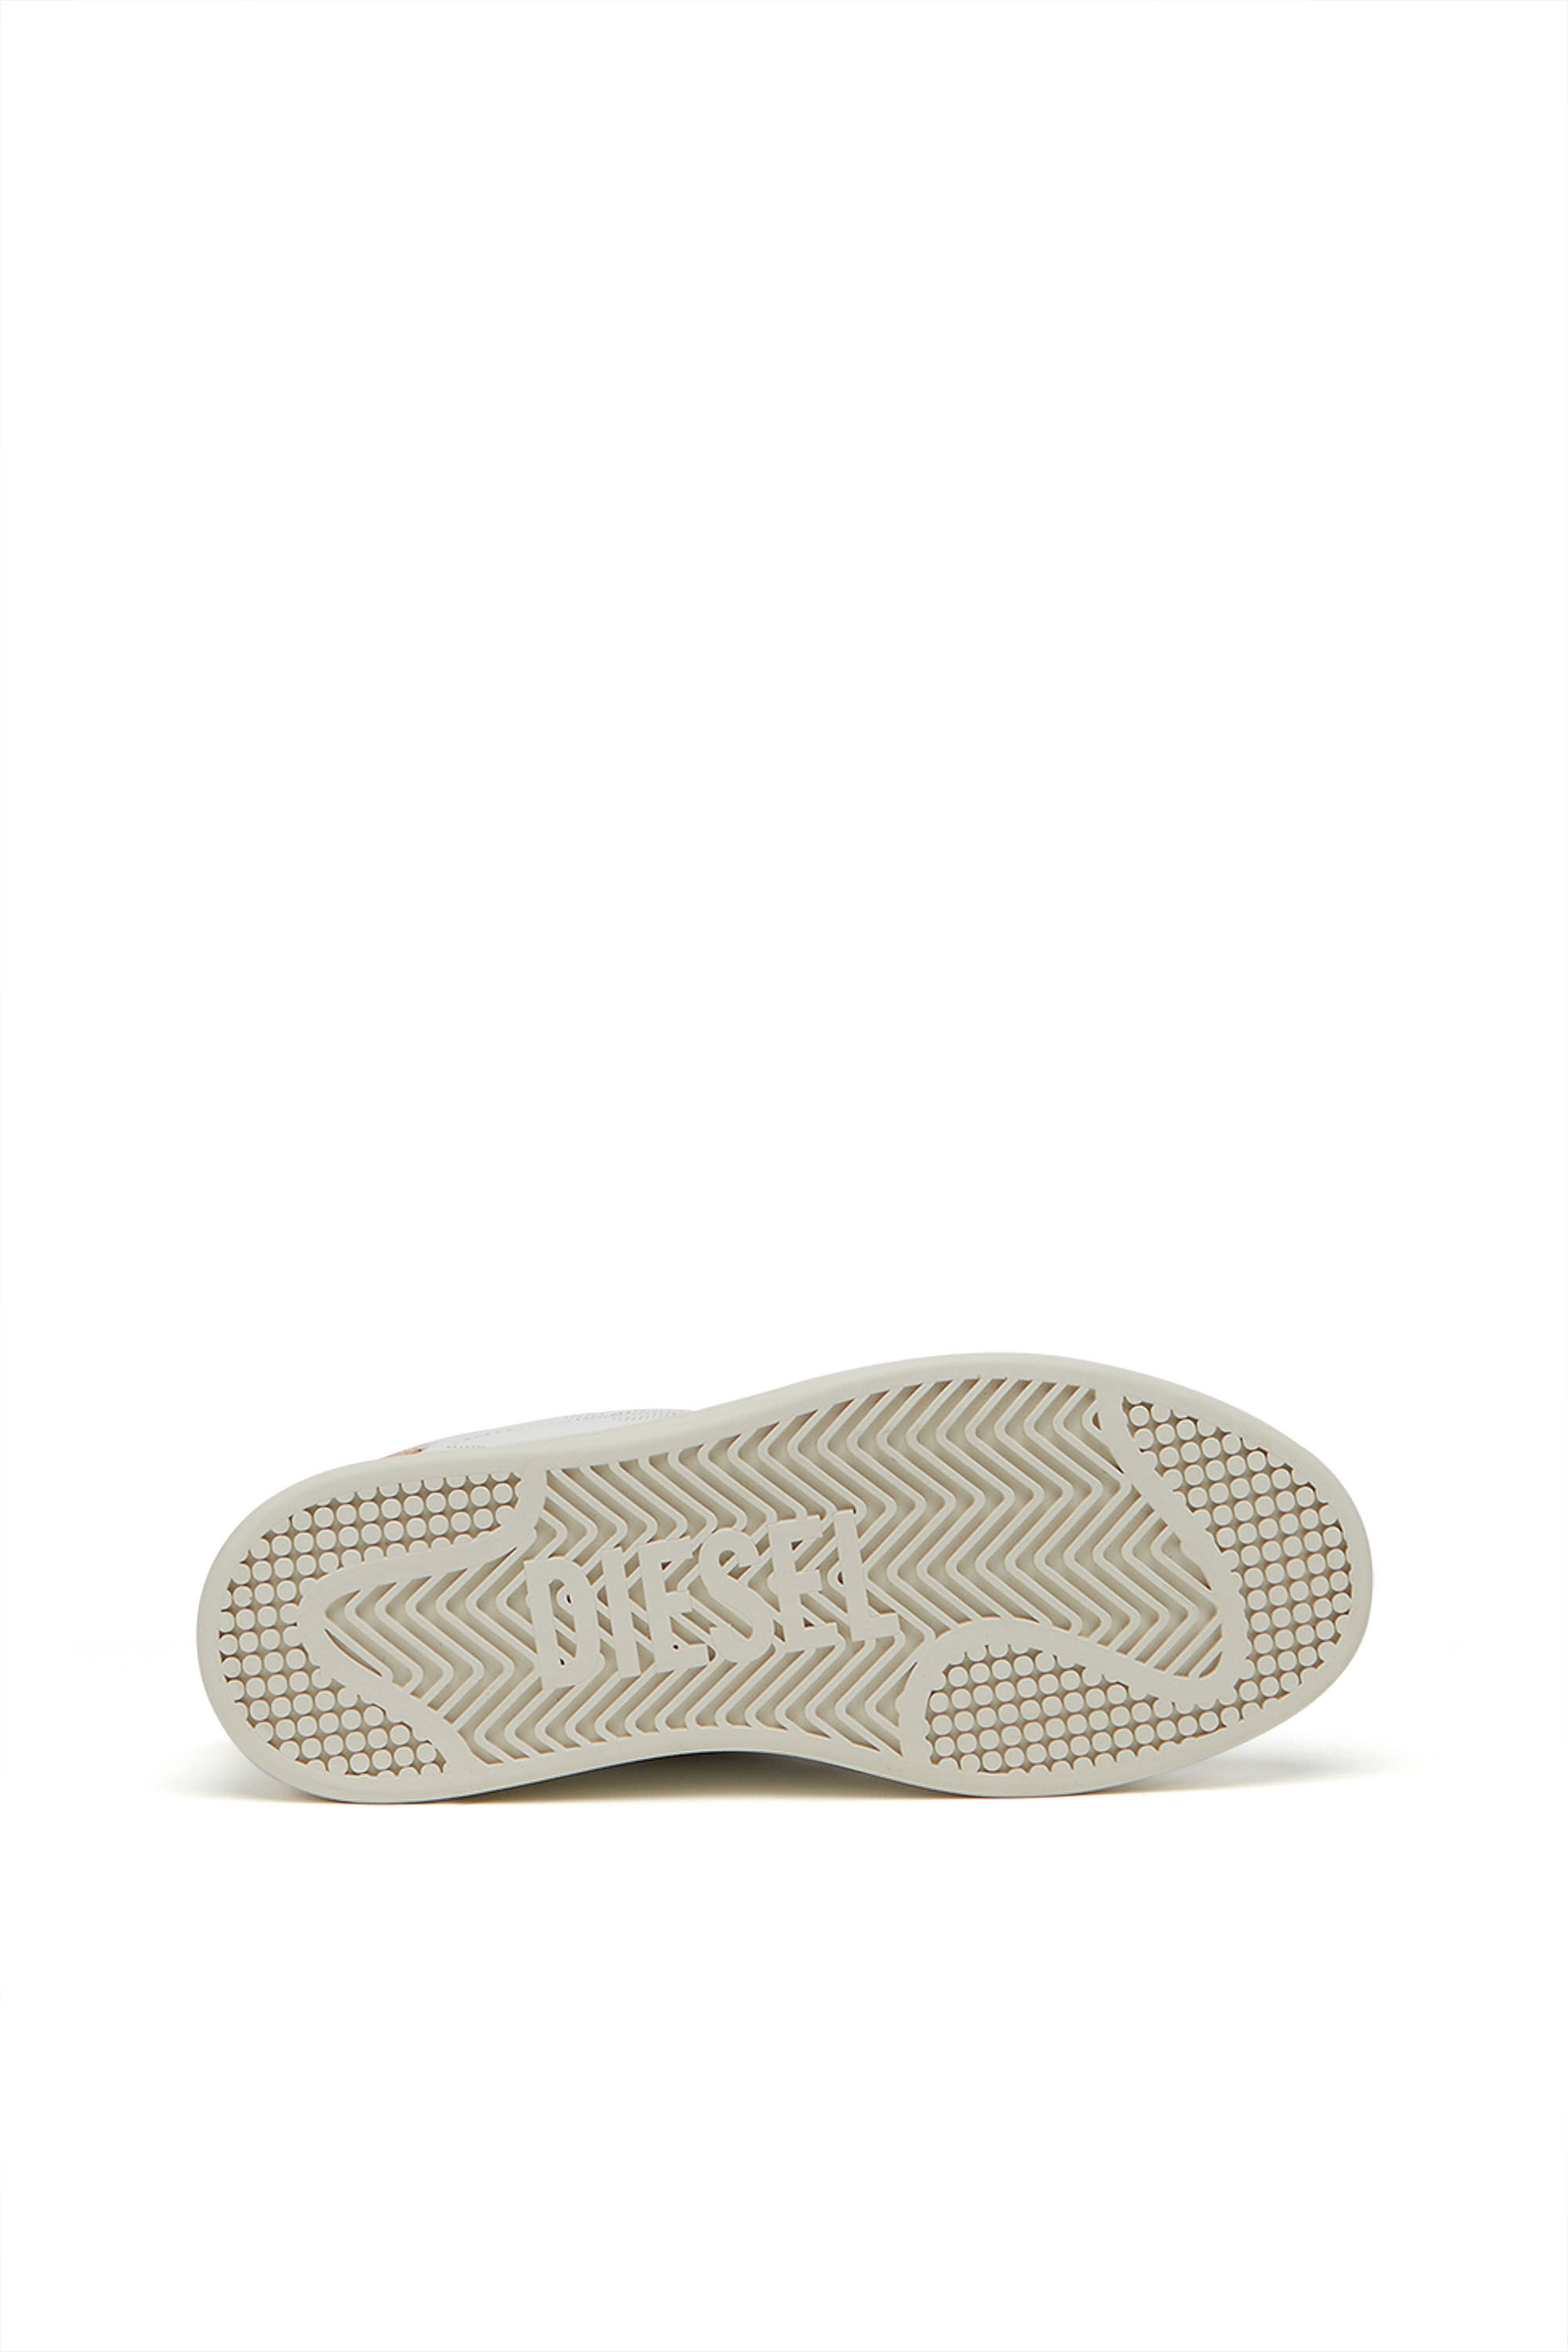 Diesel - S-ATHENE LOW W, Weiss/Rosa - Image 5